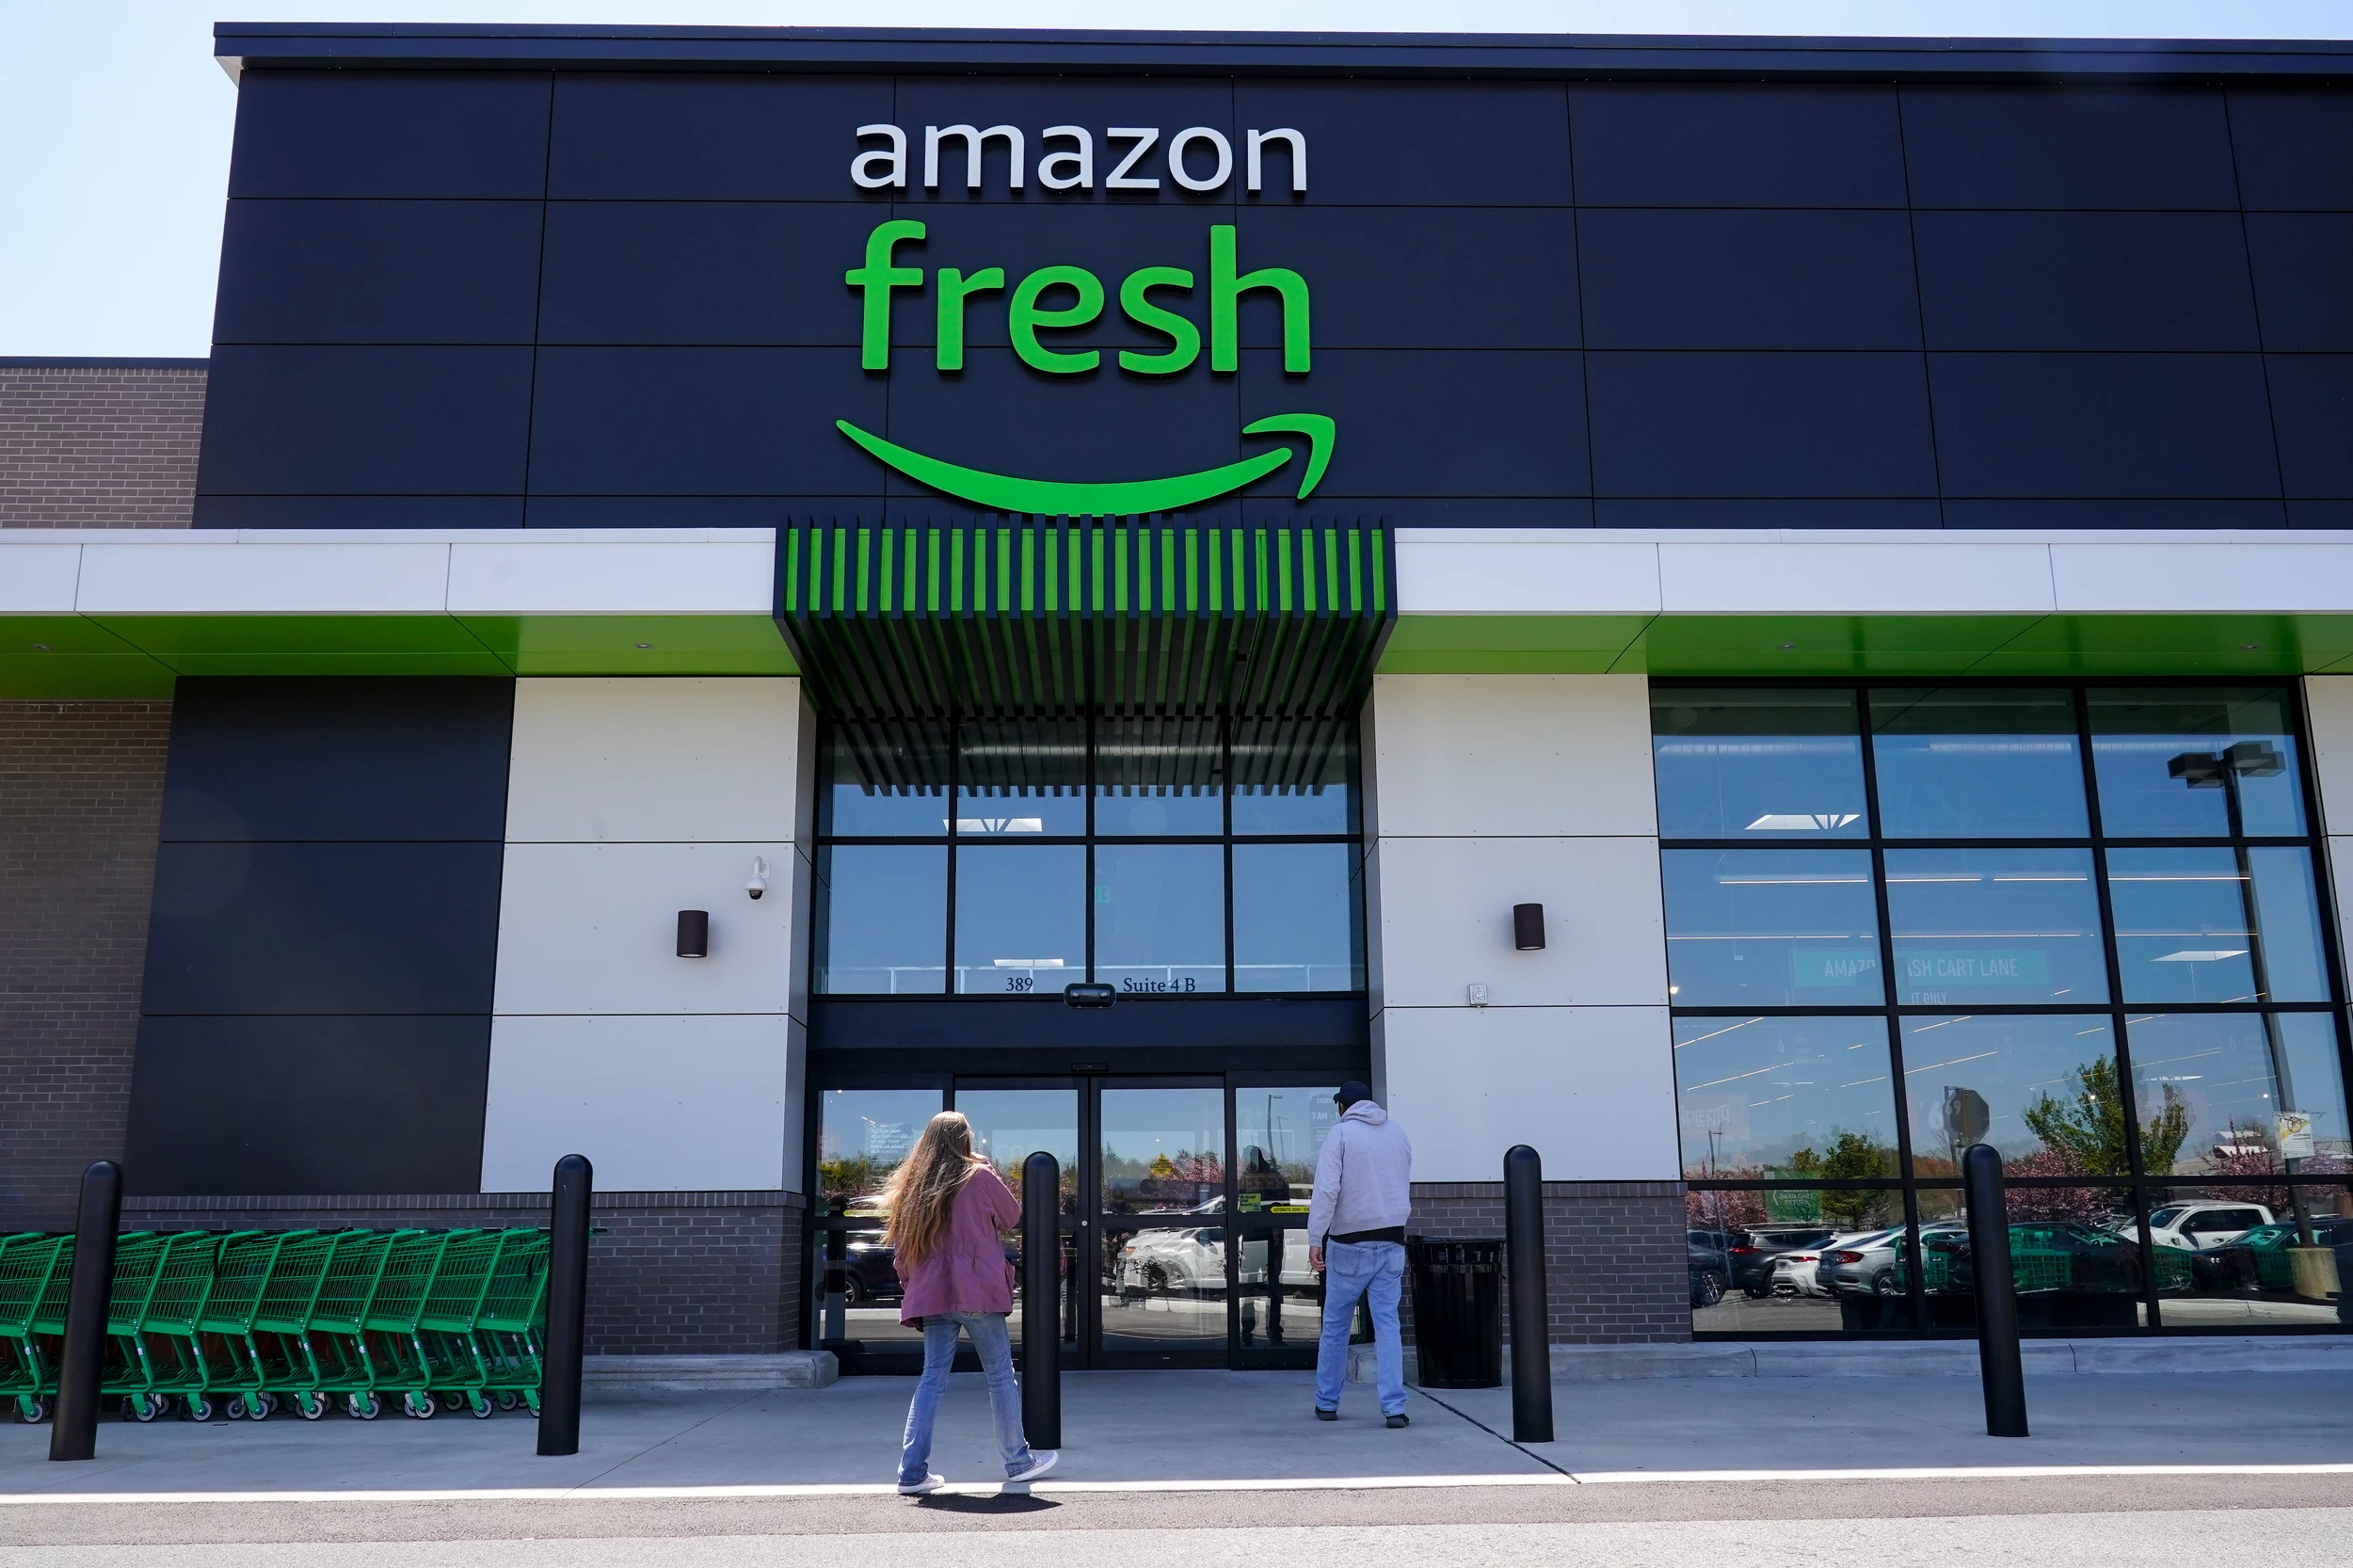 Amazon Fresh, Whole Foods opening new stores in New Jersey